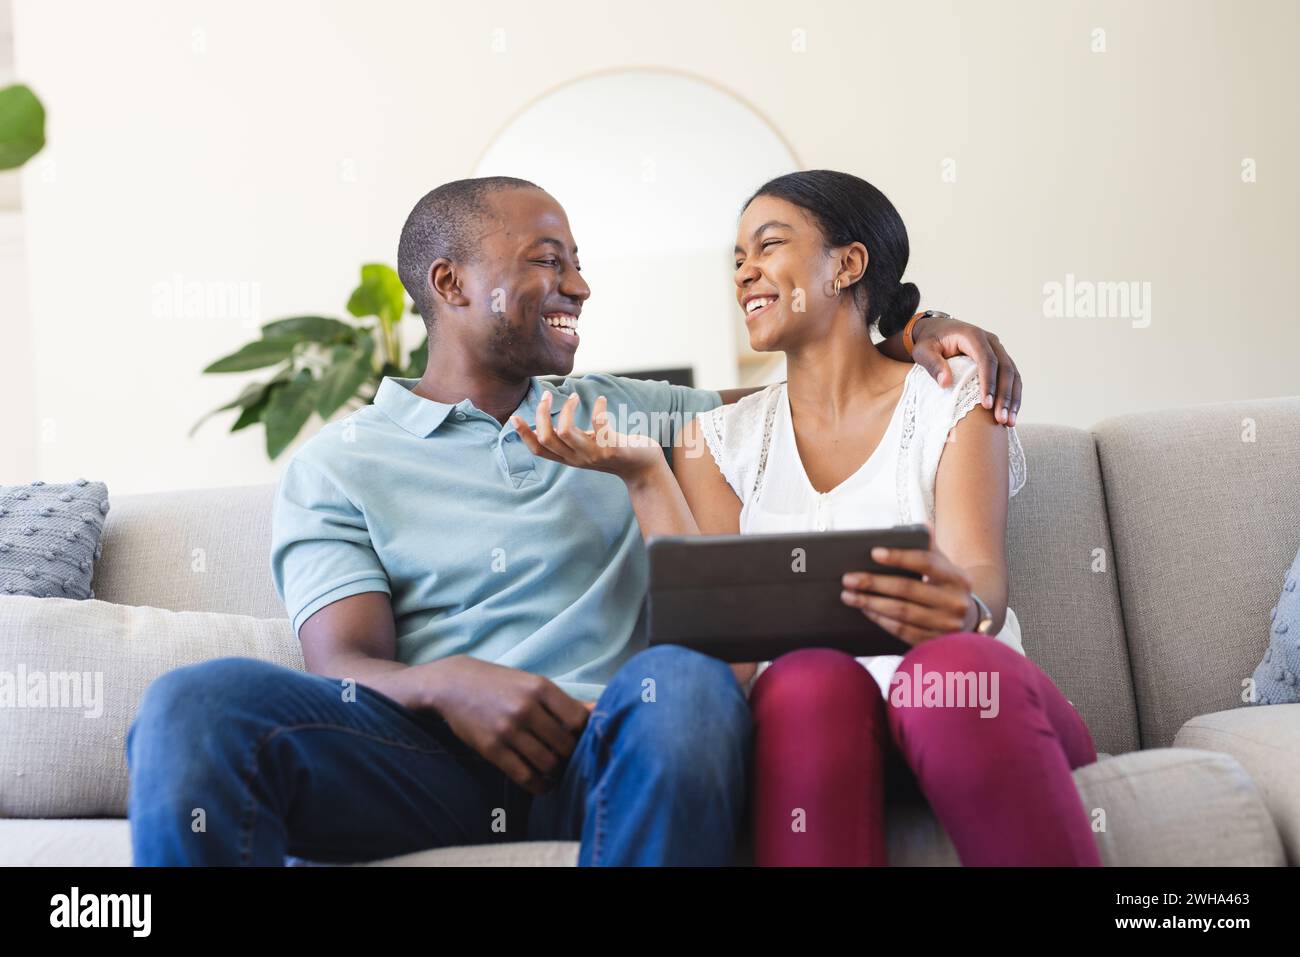 Young biracial woman and African American man share a tablet at home Stock Photo